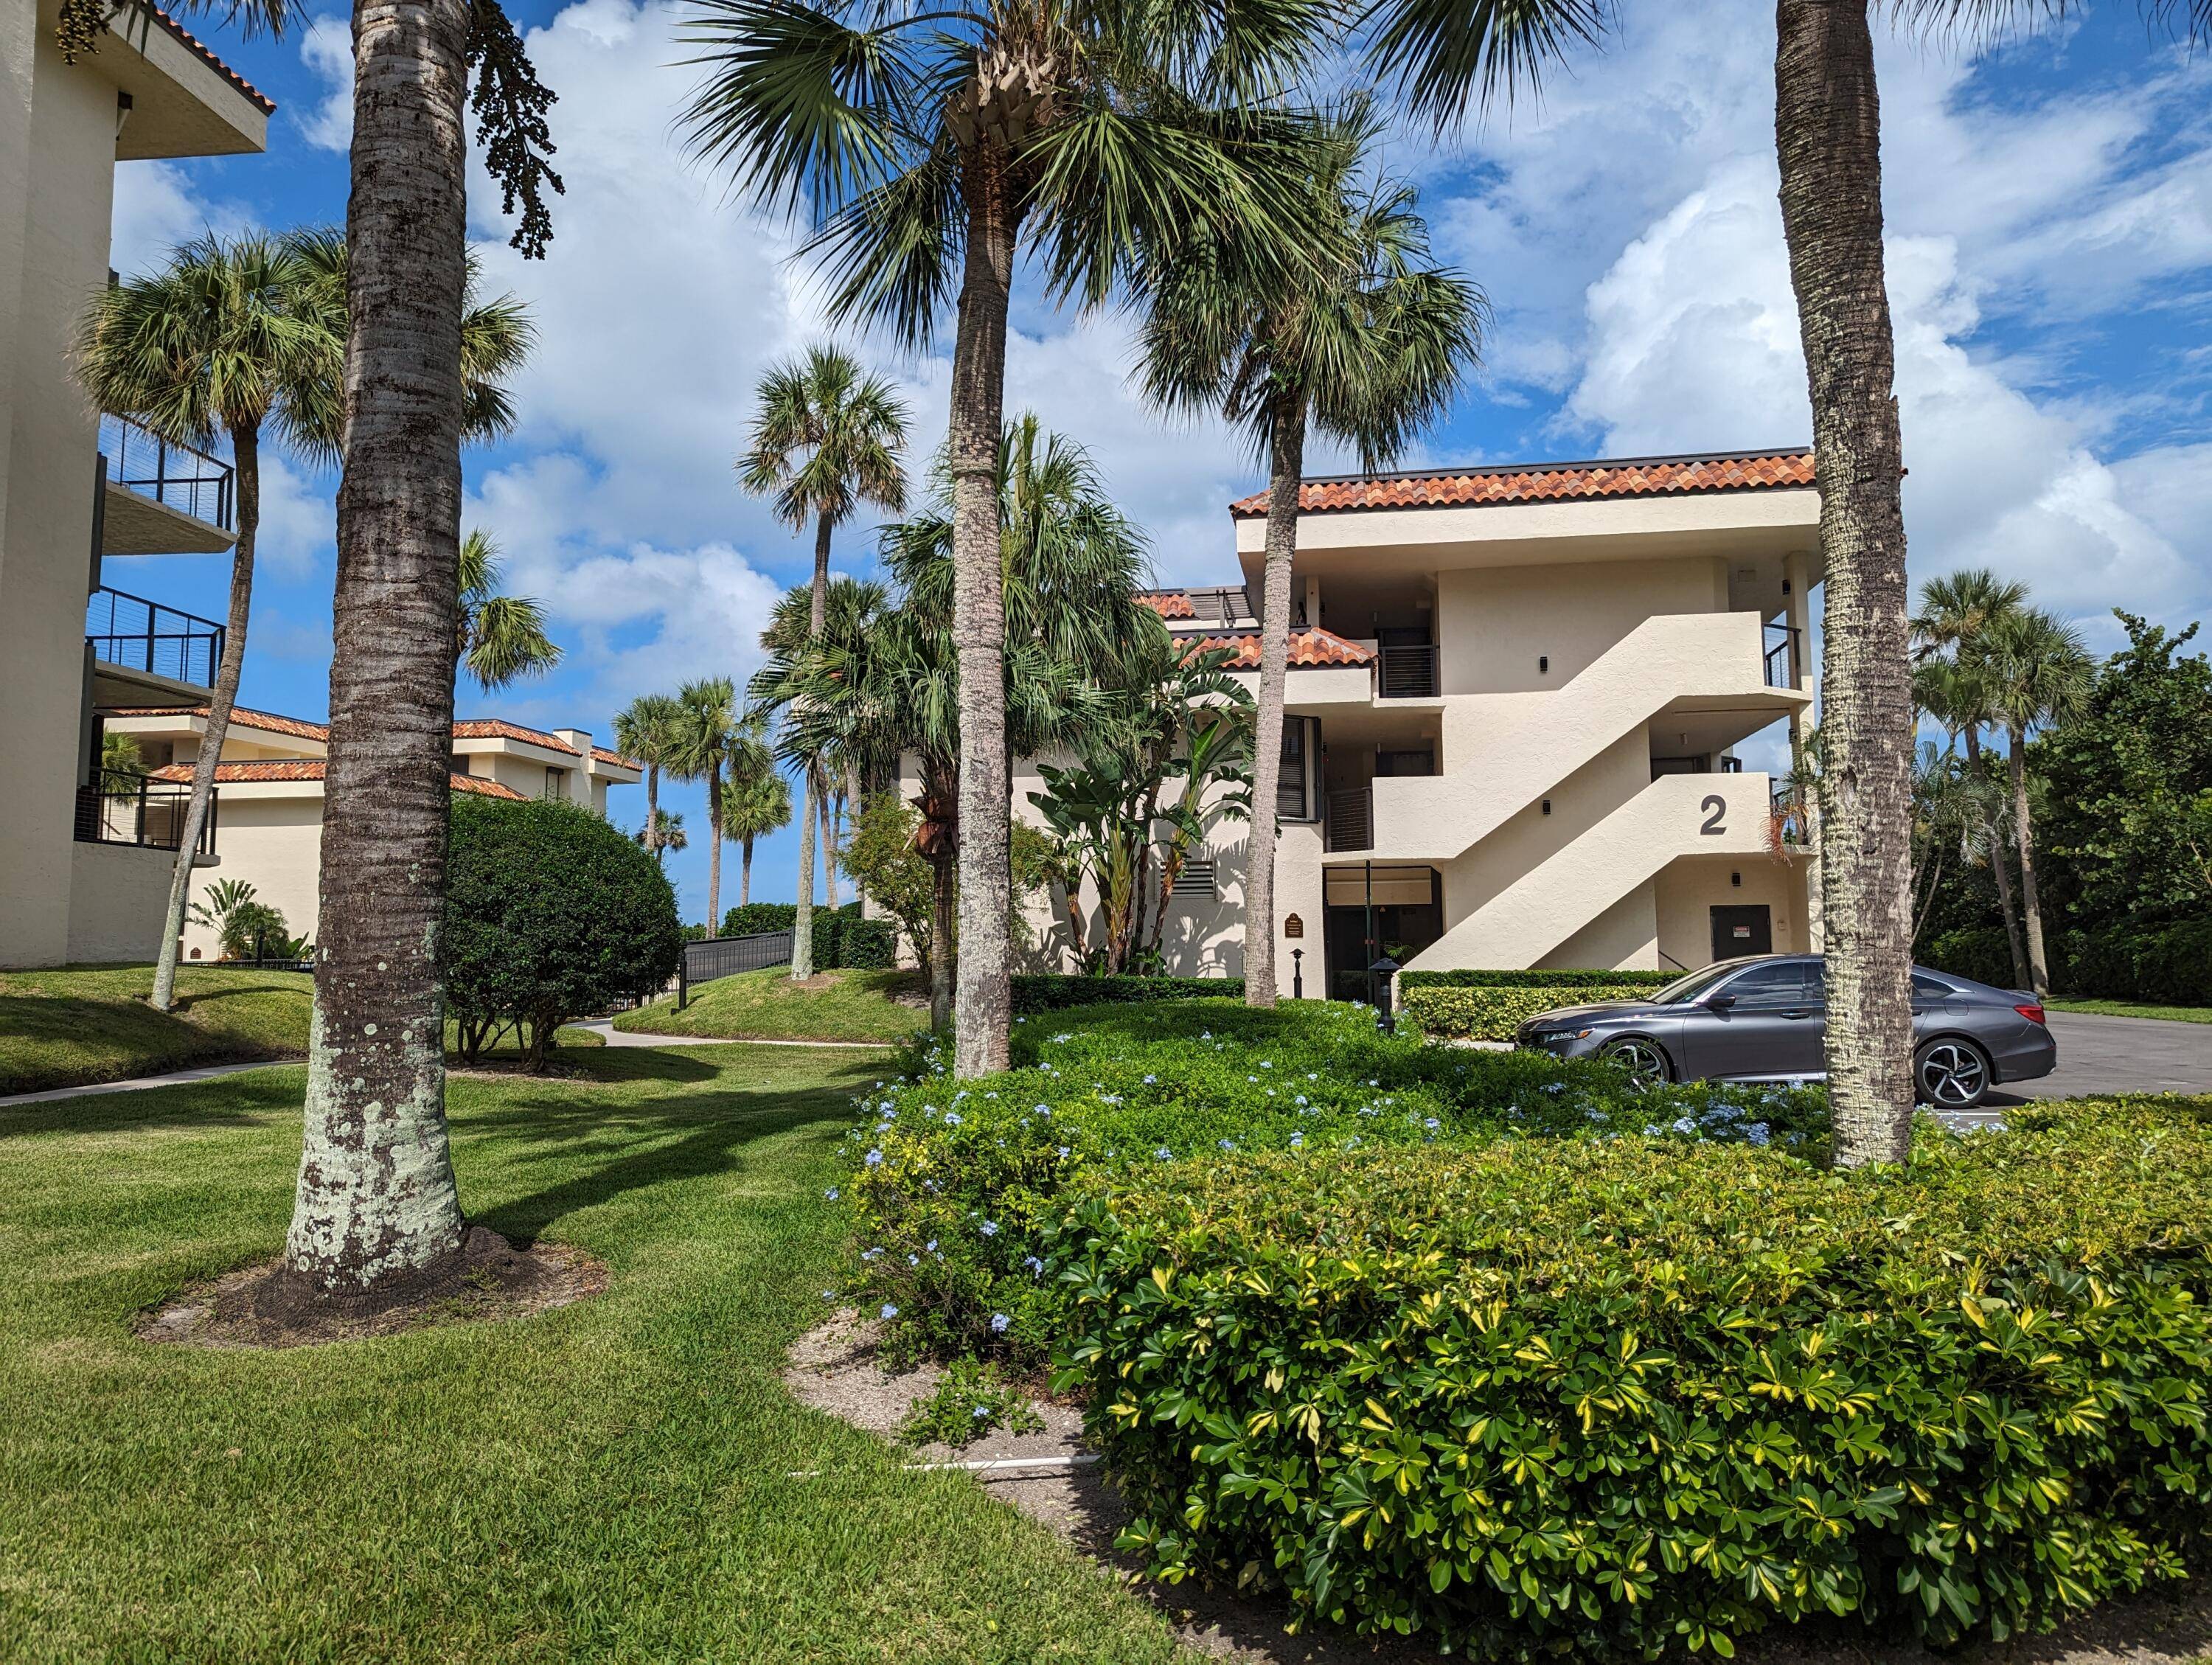 Welcome to this beautiful, Ocean Front condo on the desirable North Hutchinson Island.